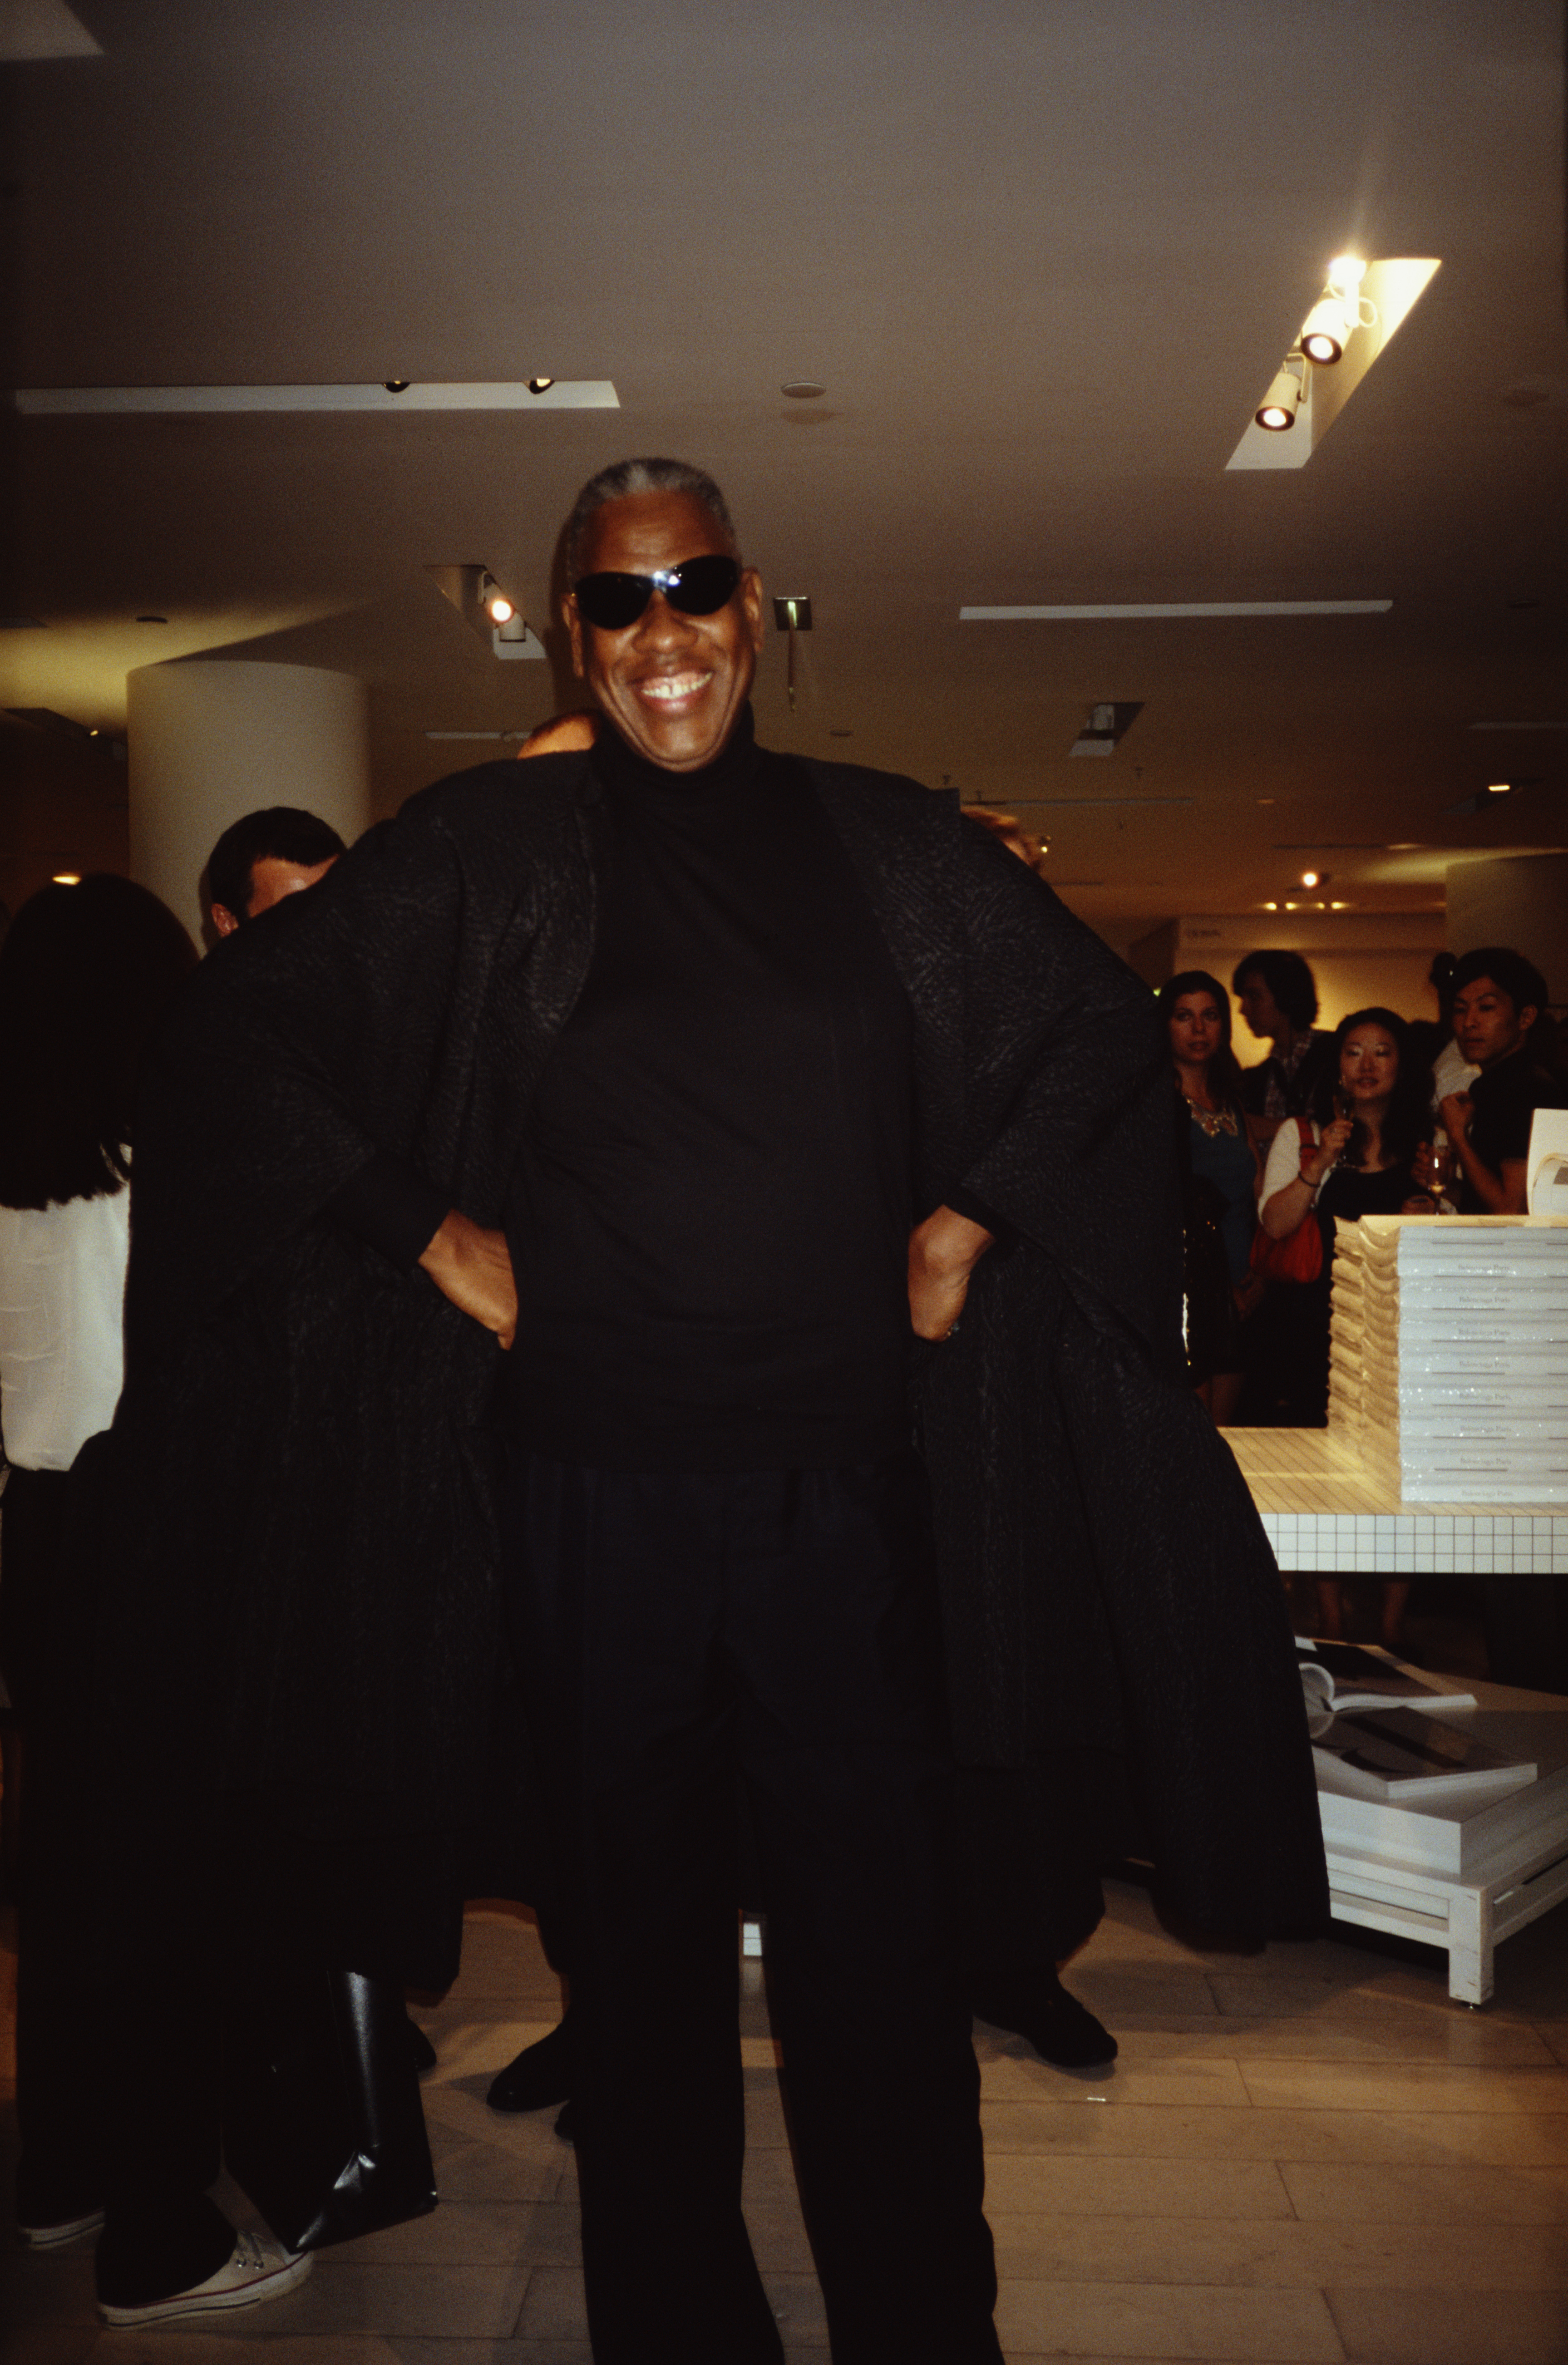 The André Leon Talley Dictionary of Fashion